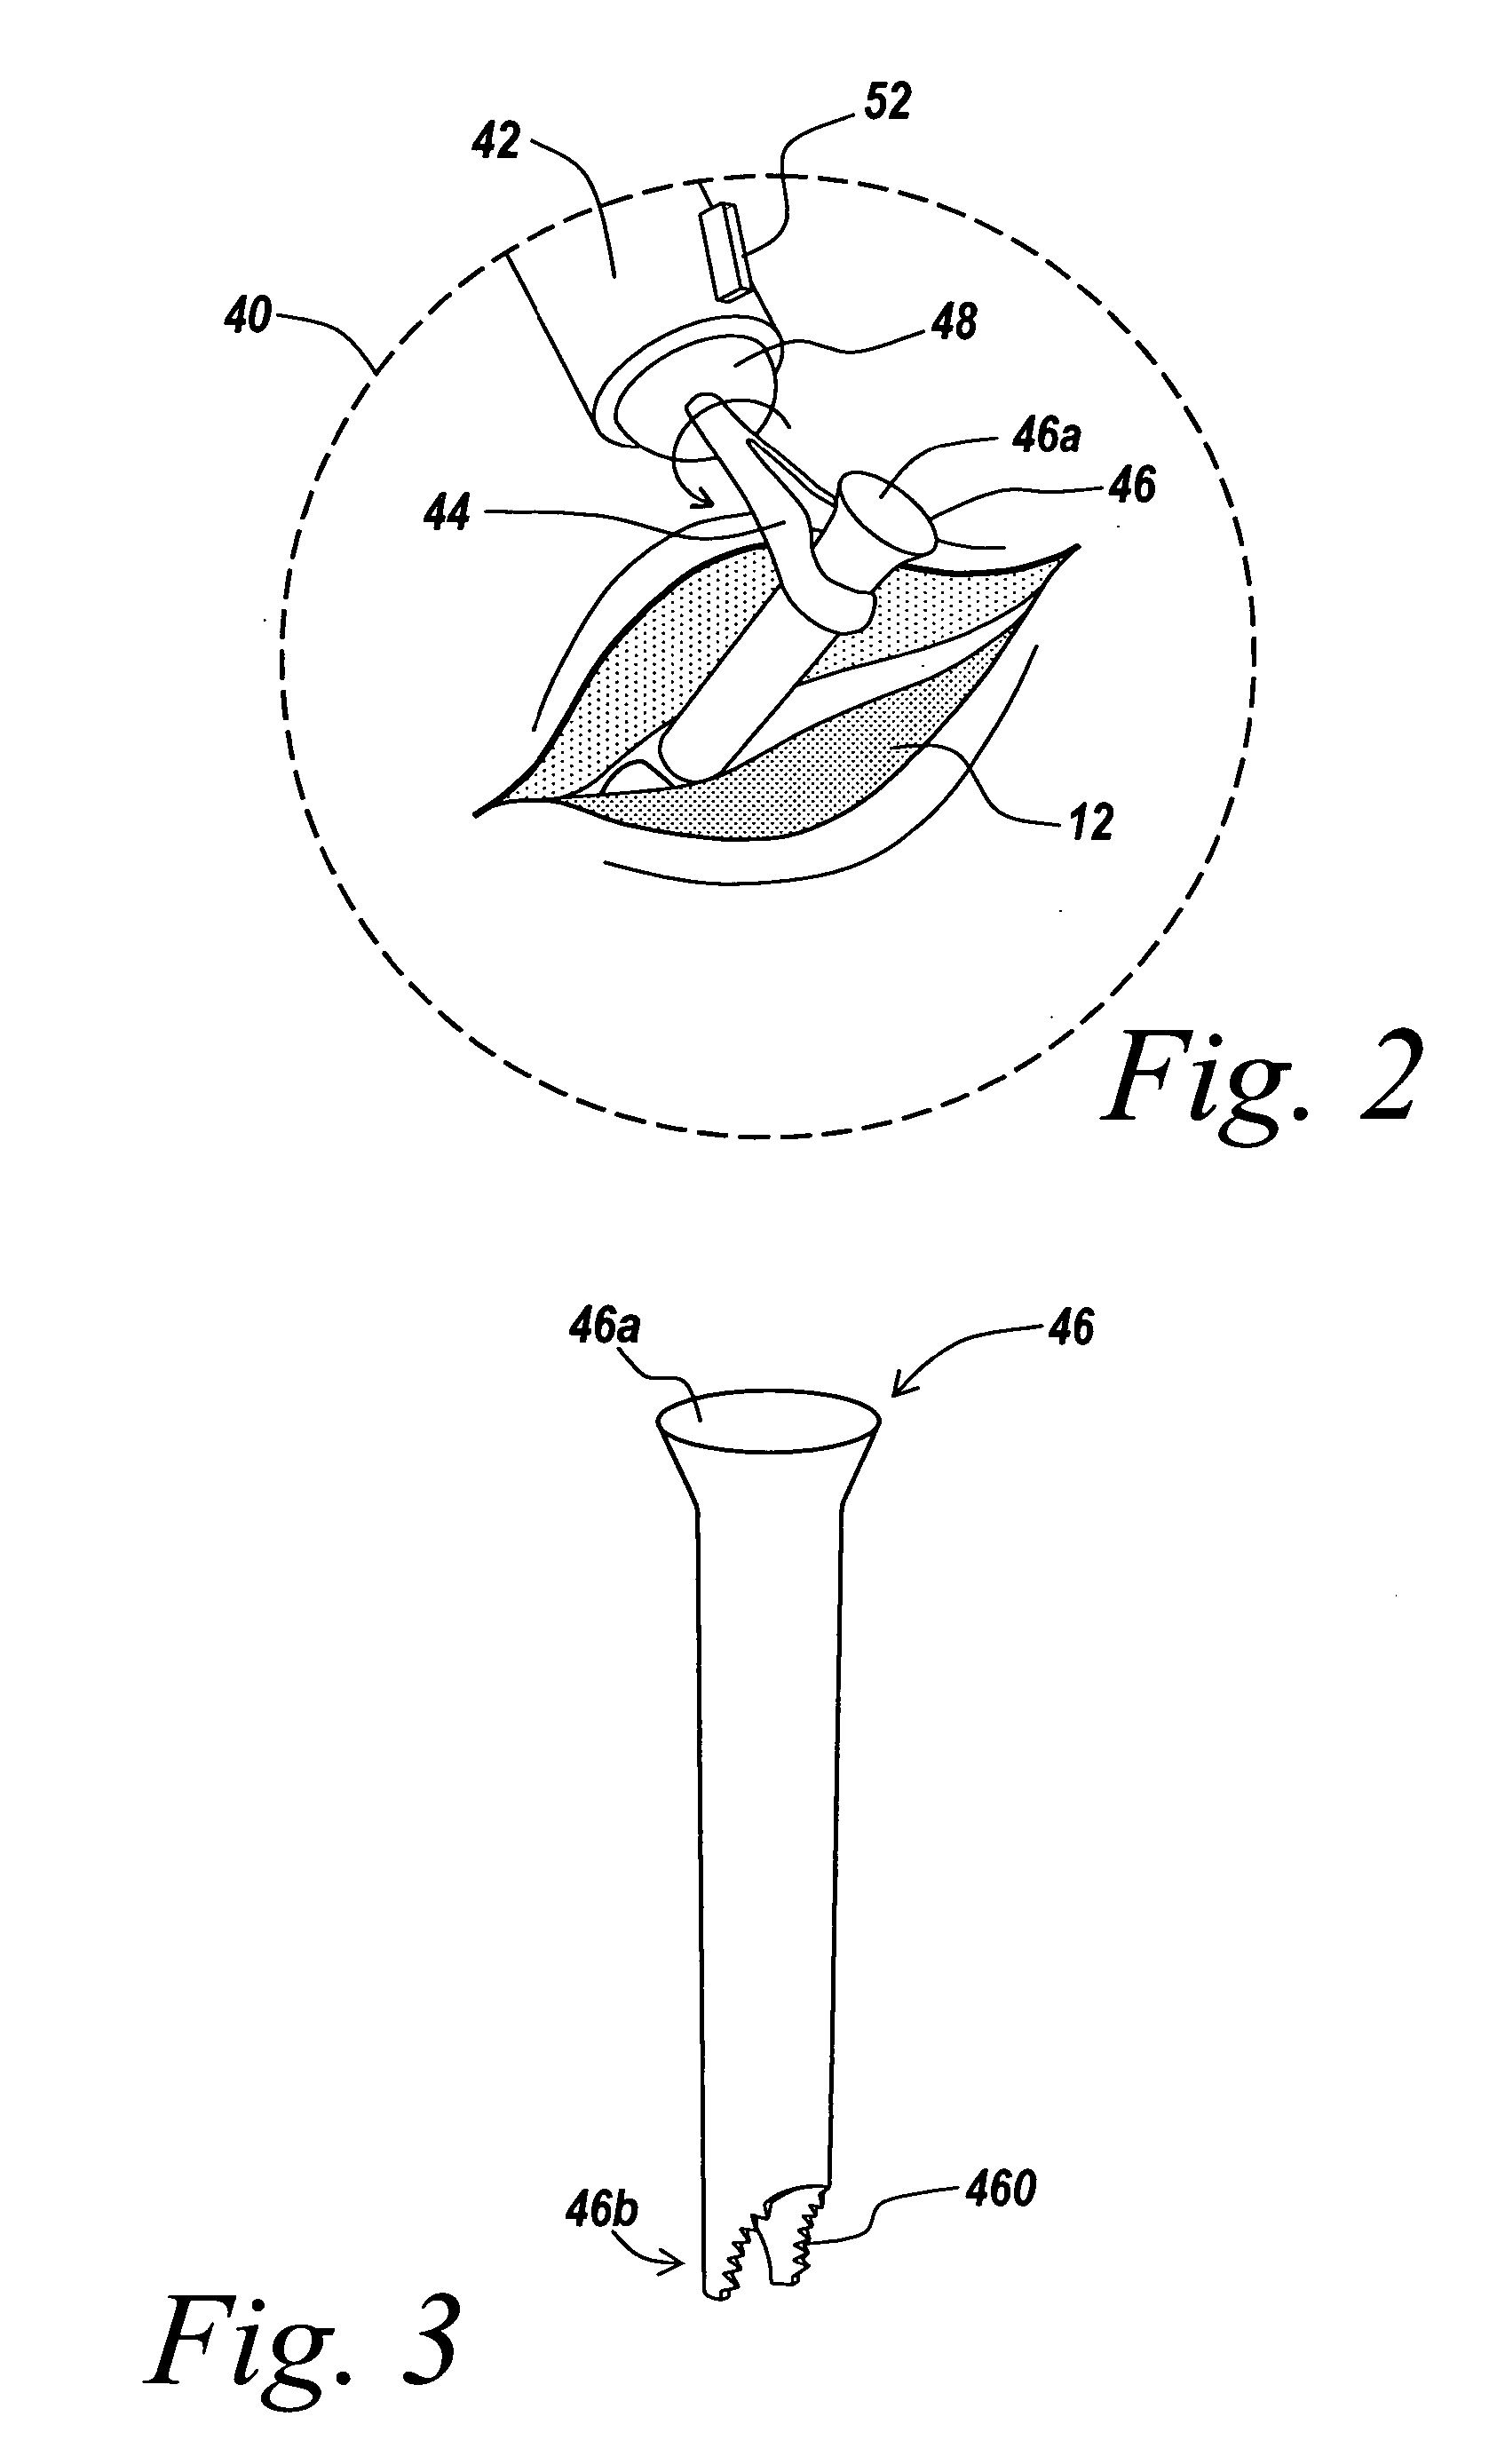 Rigidly guided implant placement with control assist